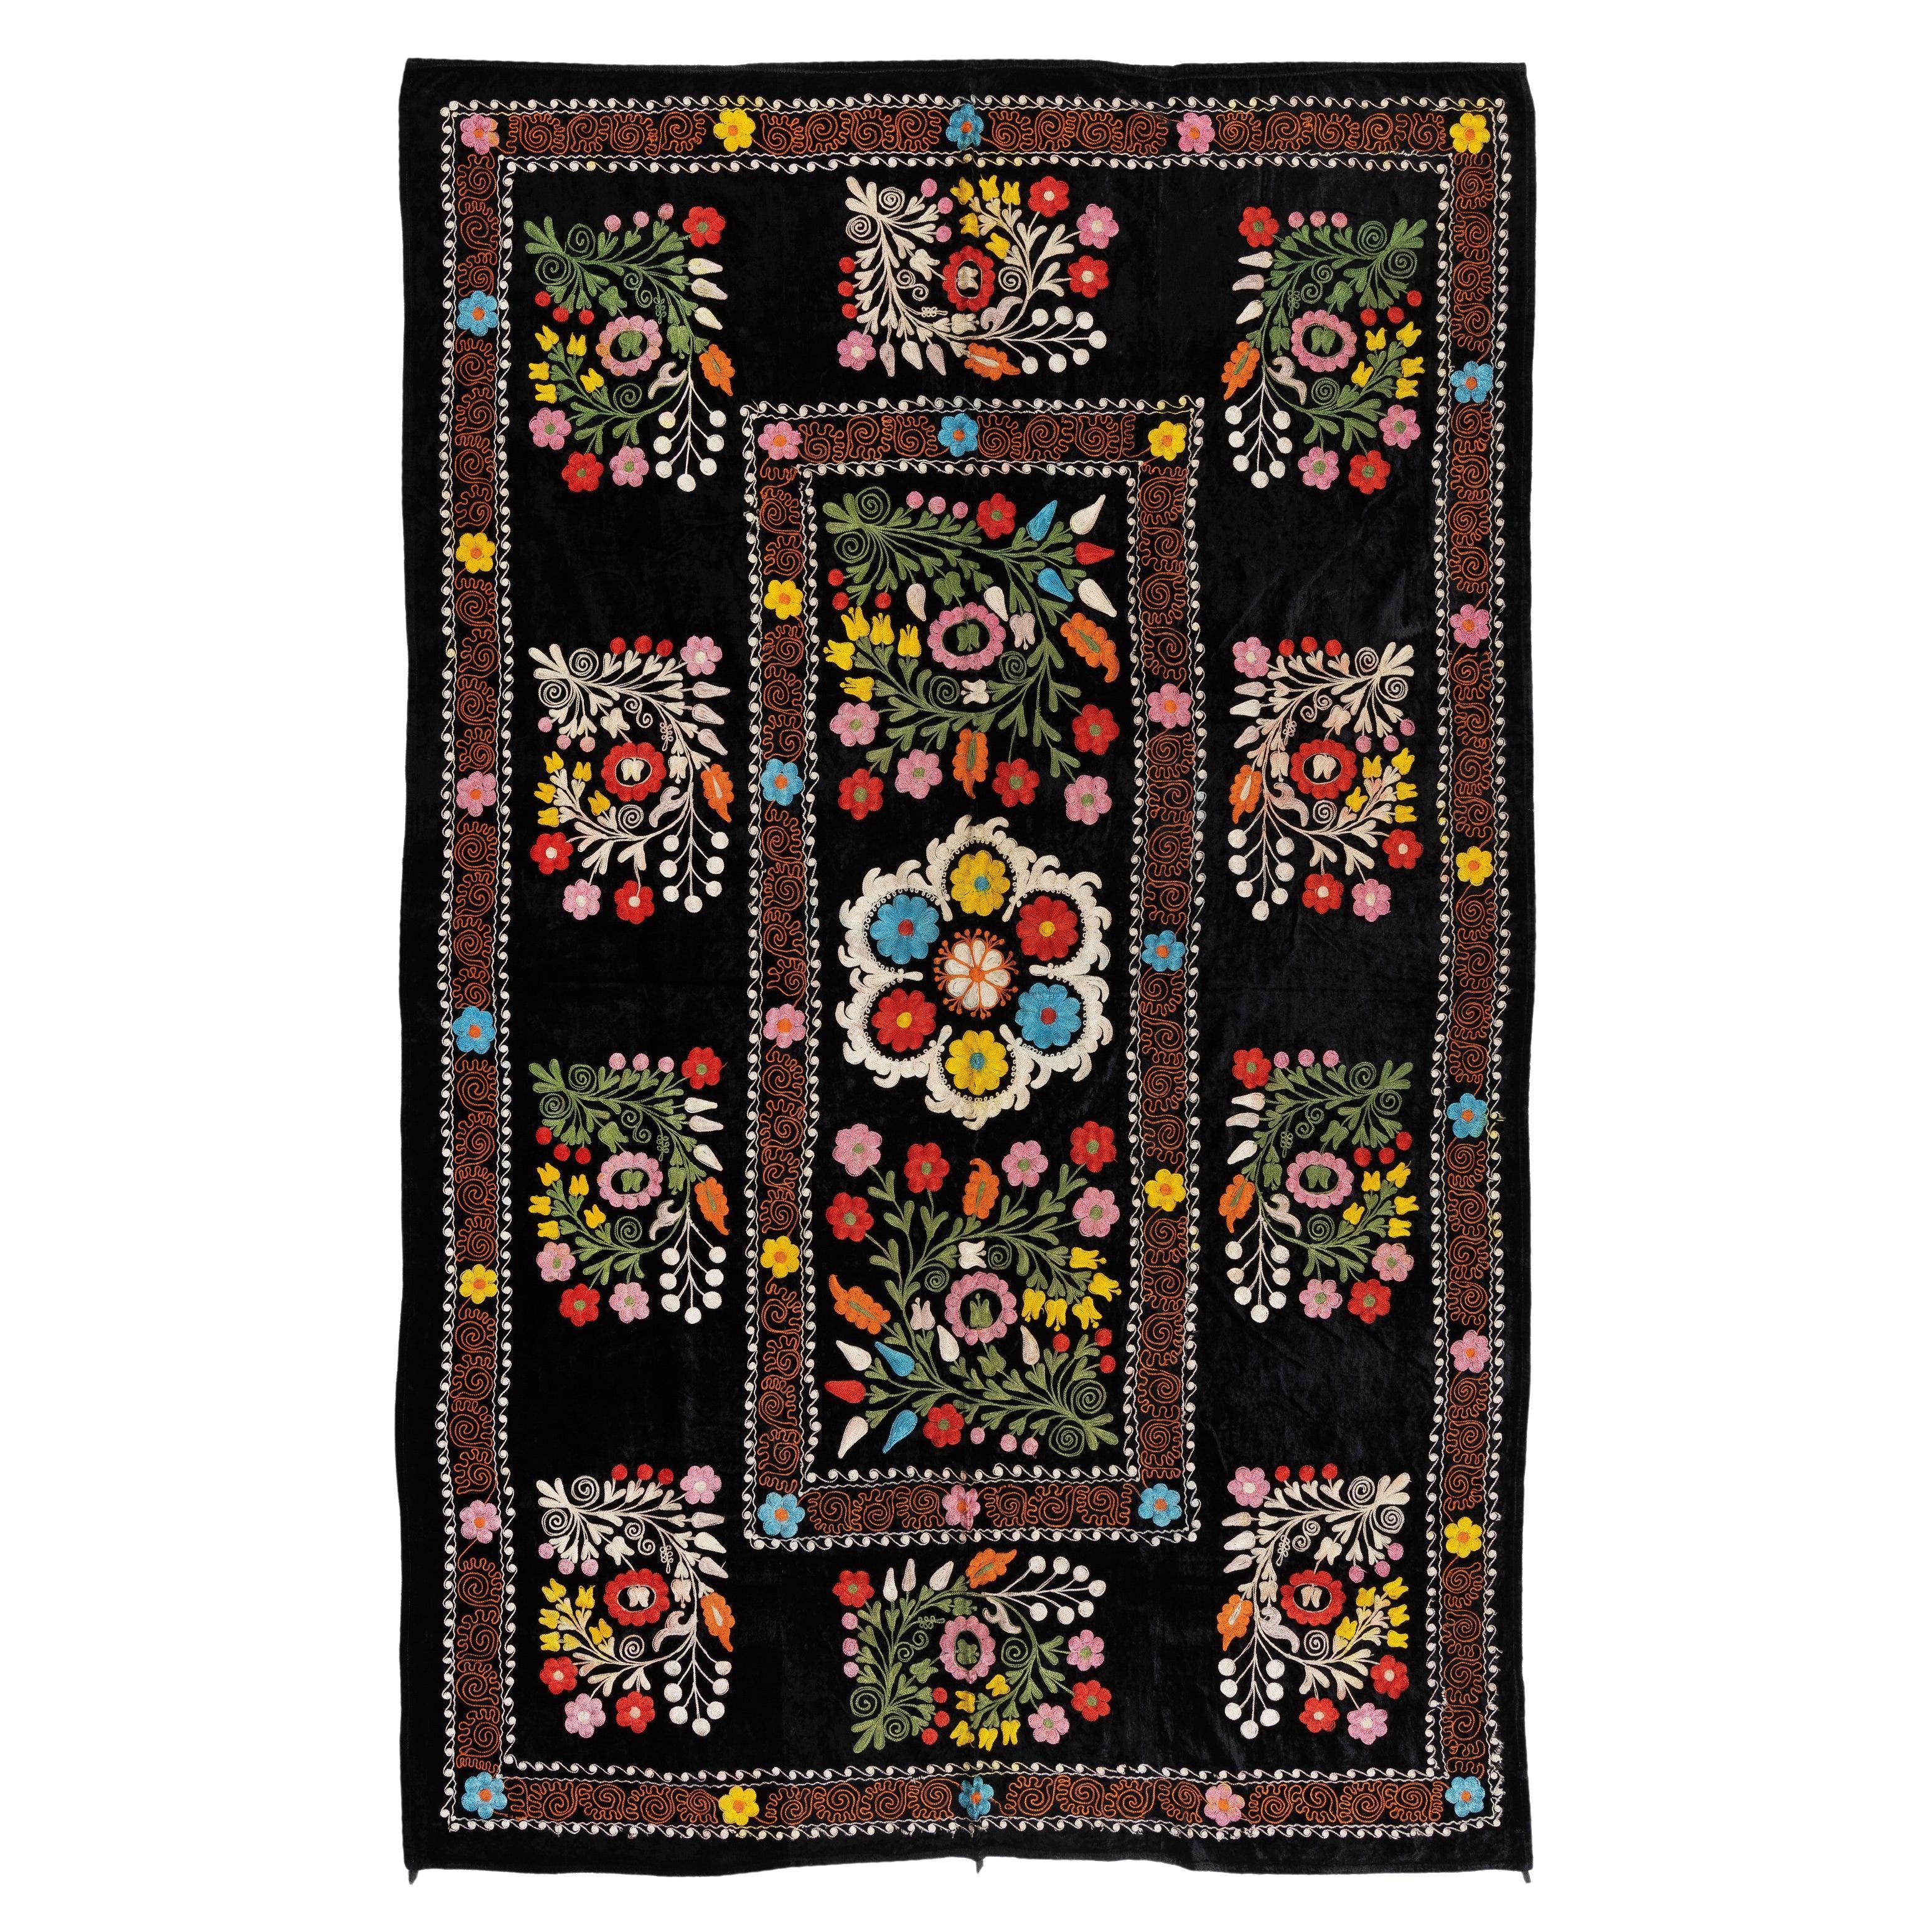 4.2x6.6 Ft Silk Embroidered Bed Cover, Black Tablecloth, Colorful Wall Hanging For Sale